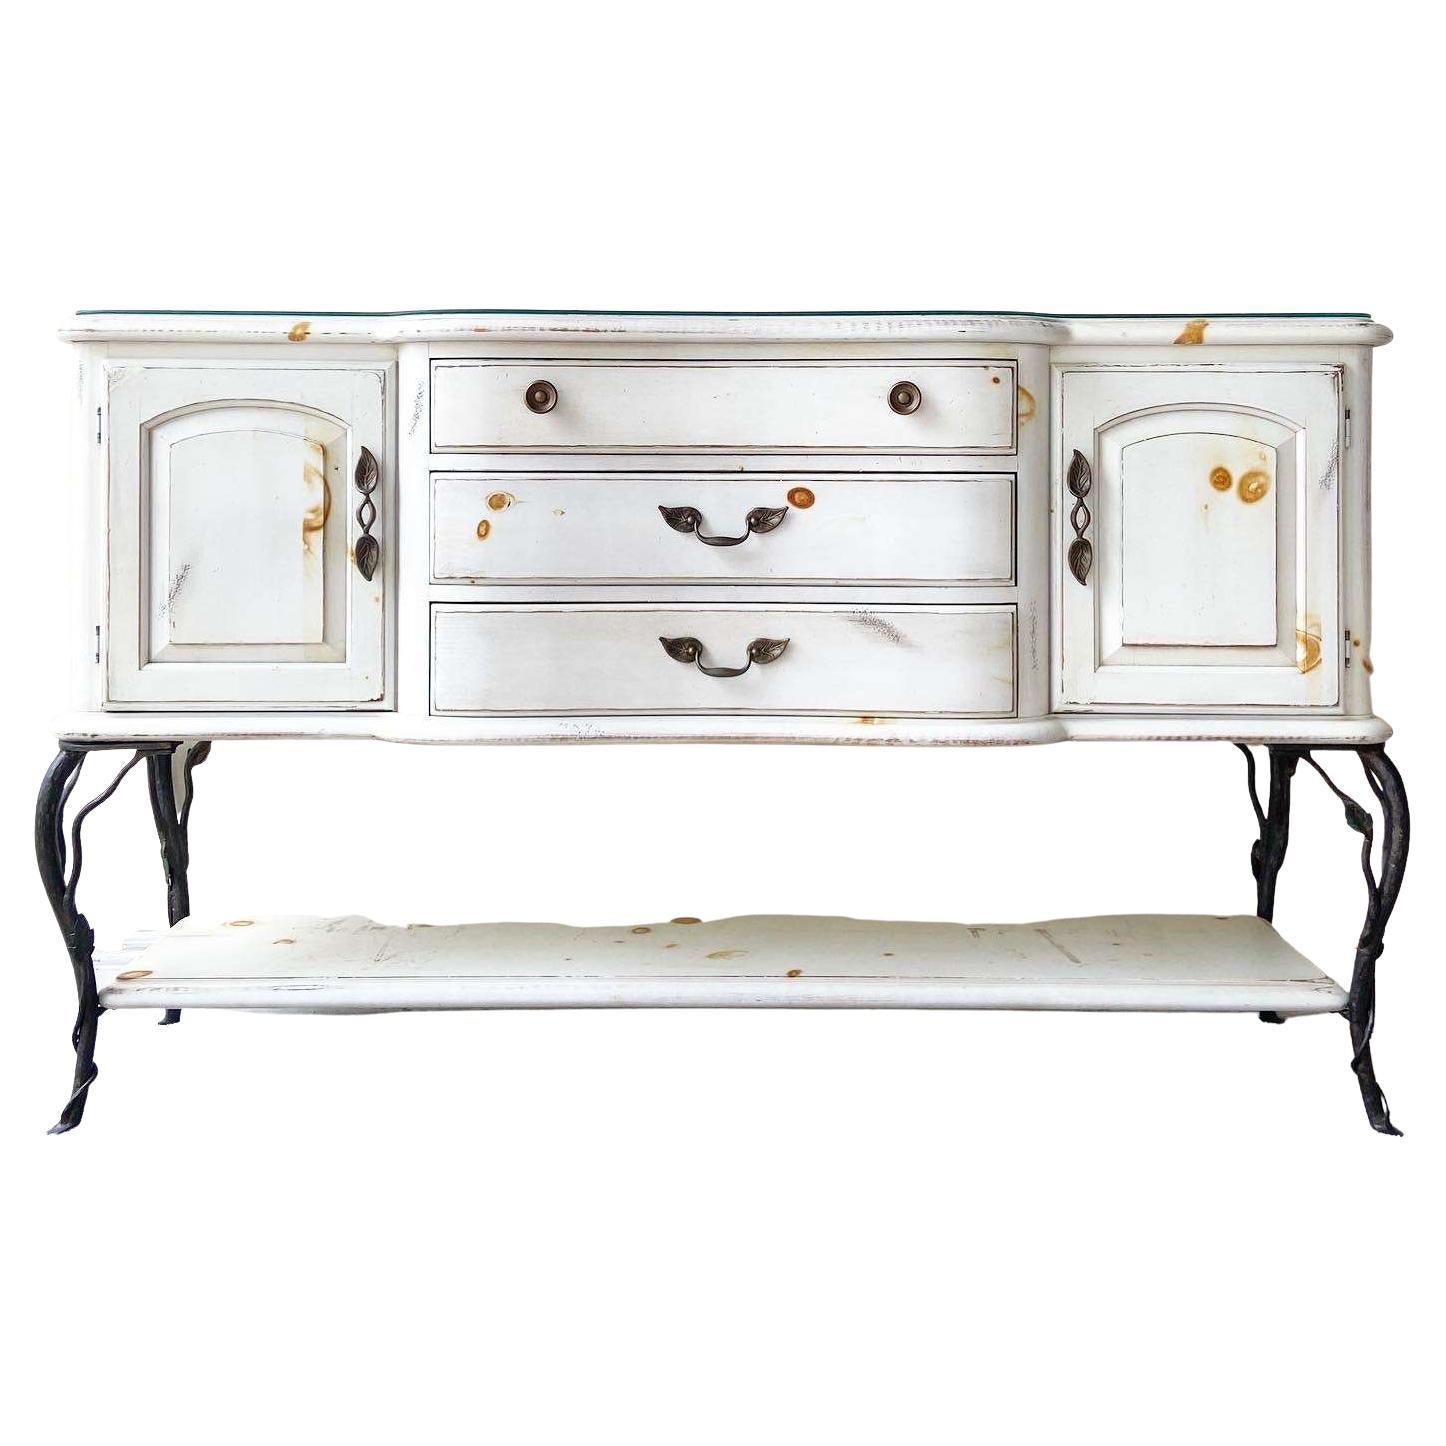 French Farm House White Credenza With Iron Legs For Sale